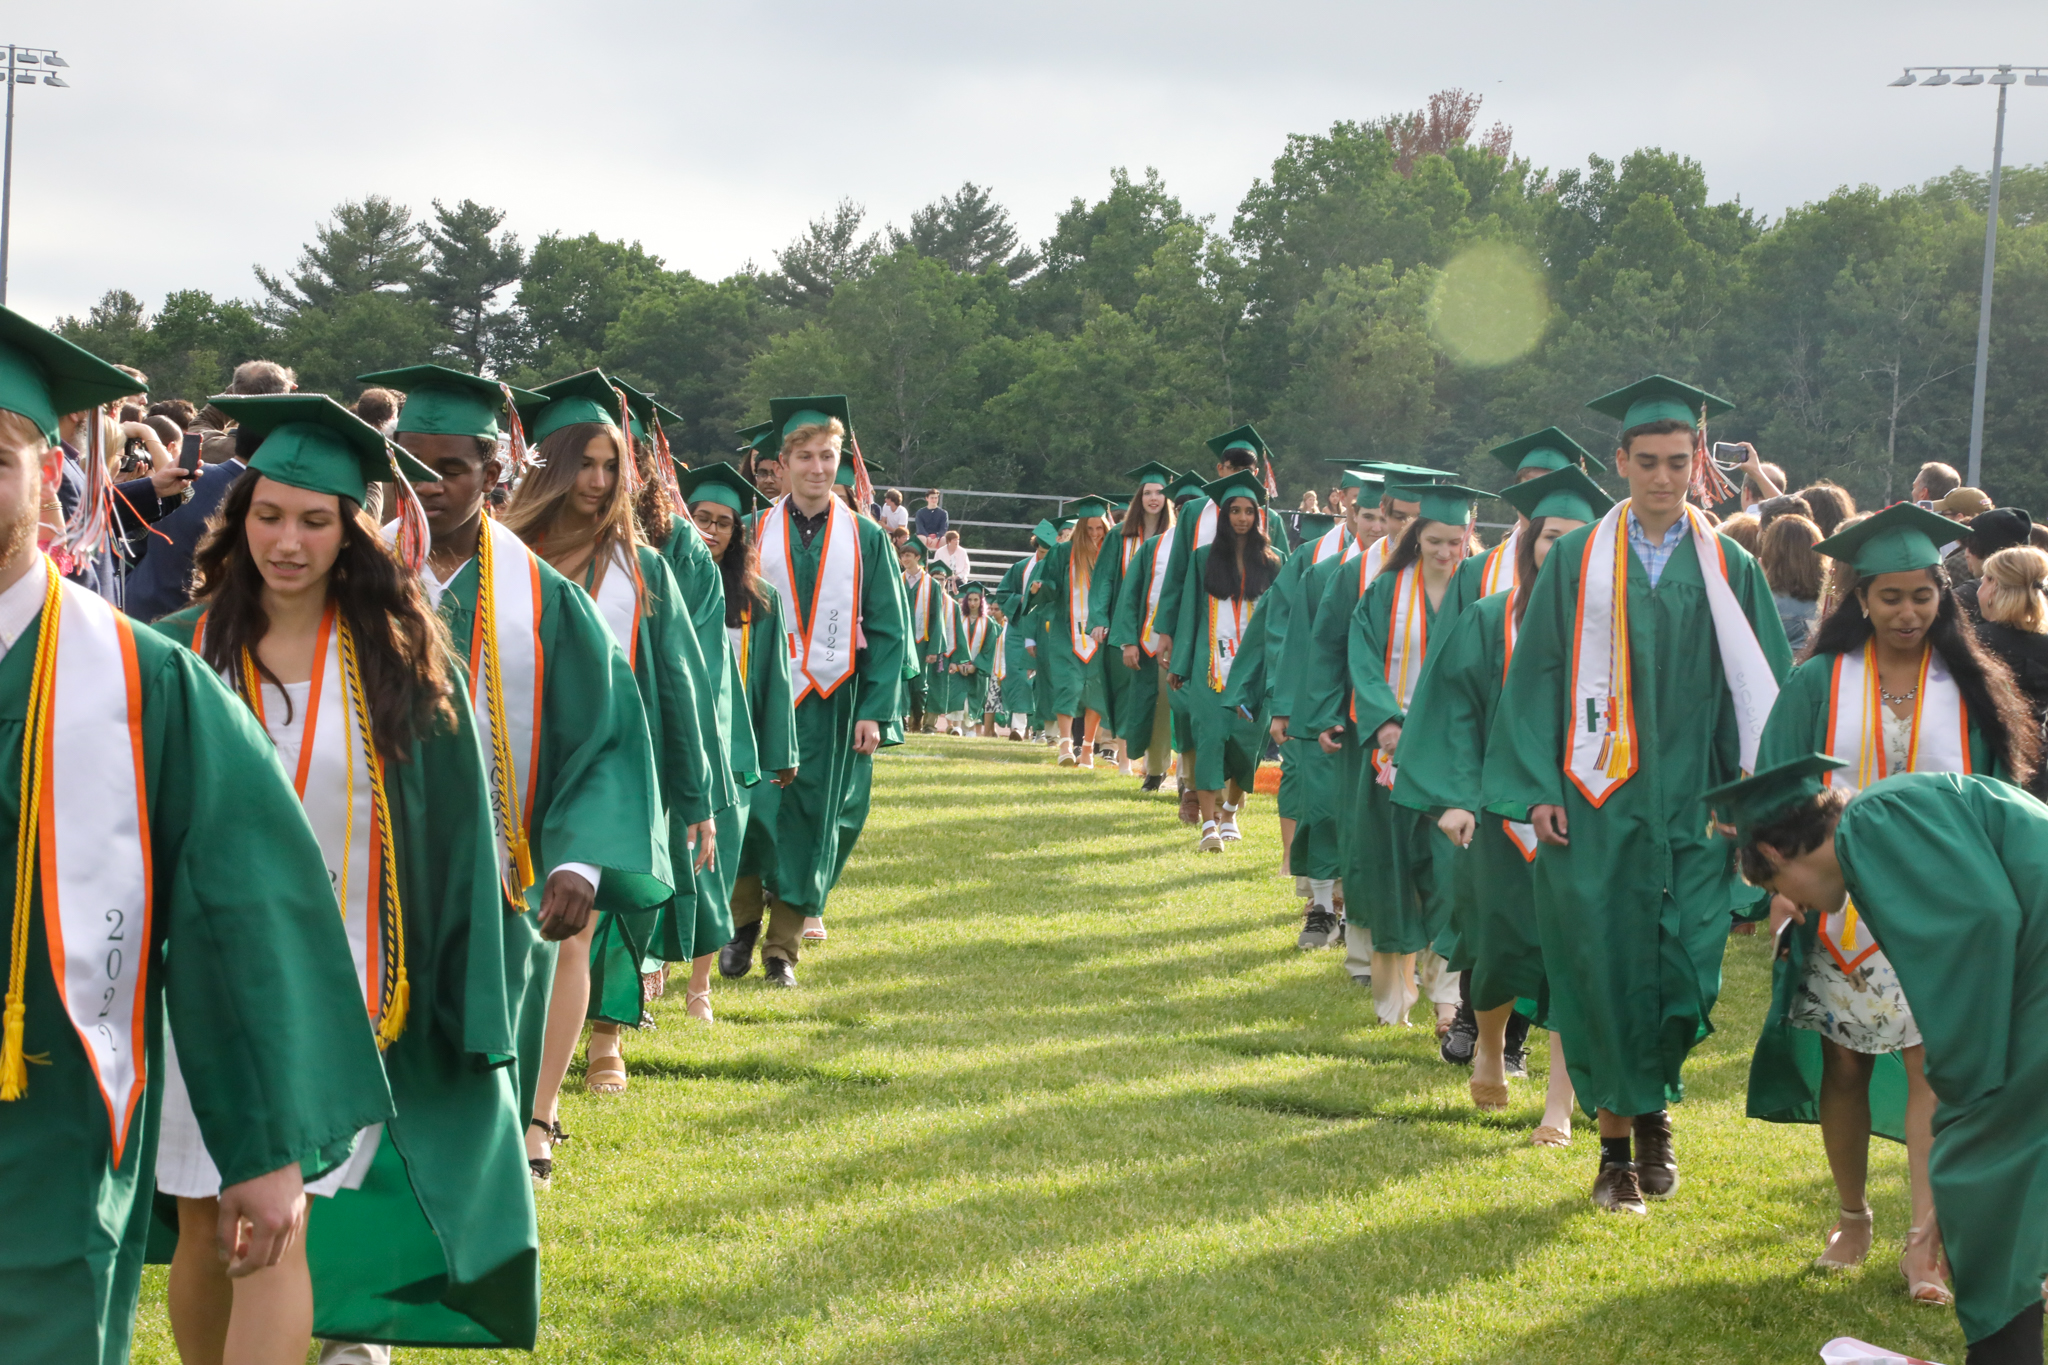 Time woven through HHS graduation ceremony